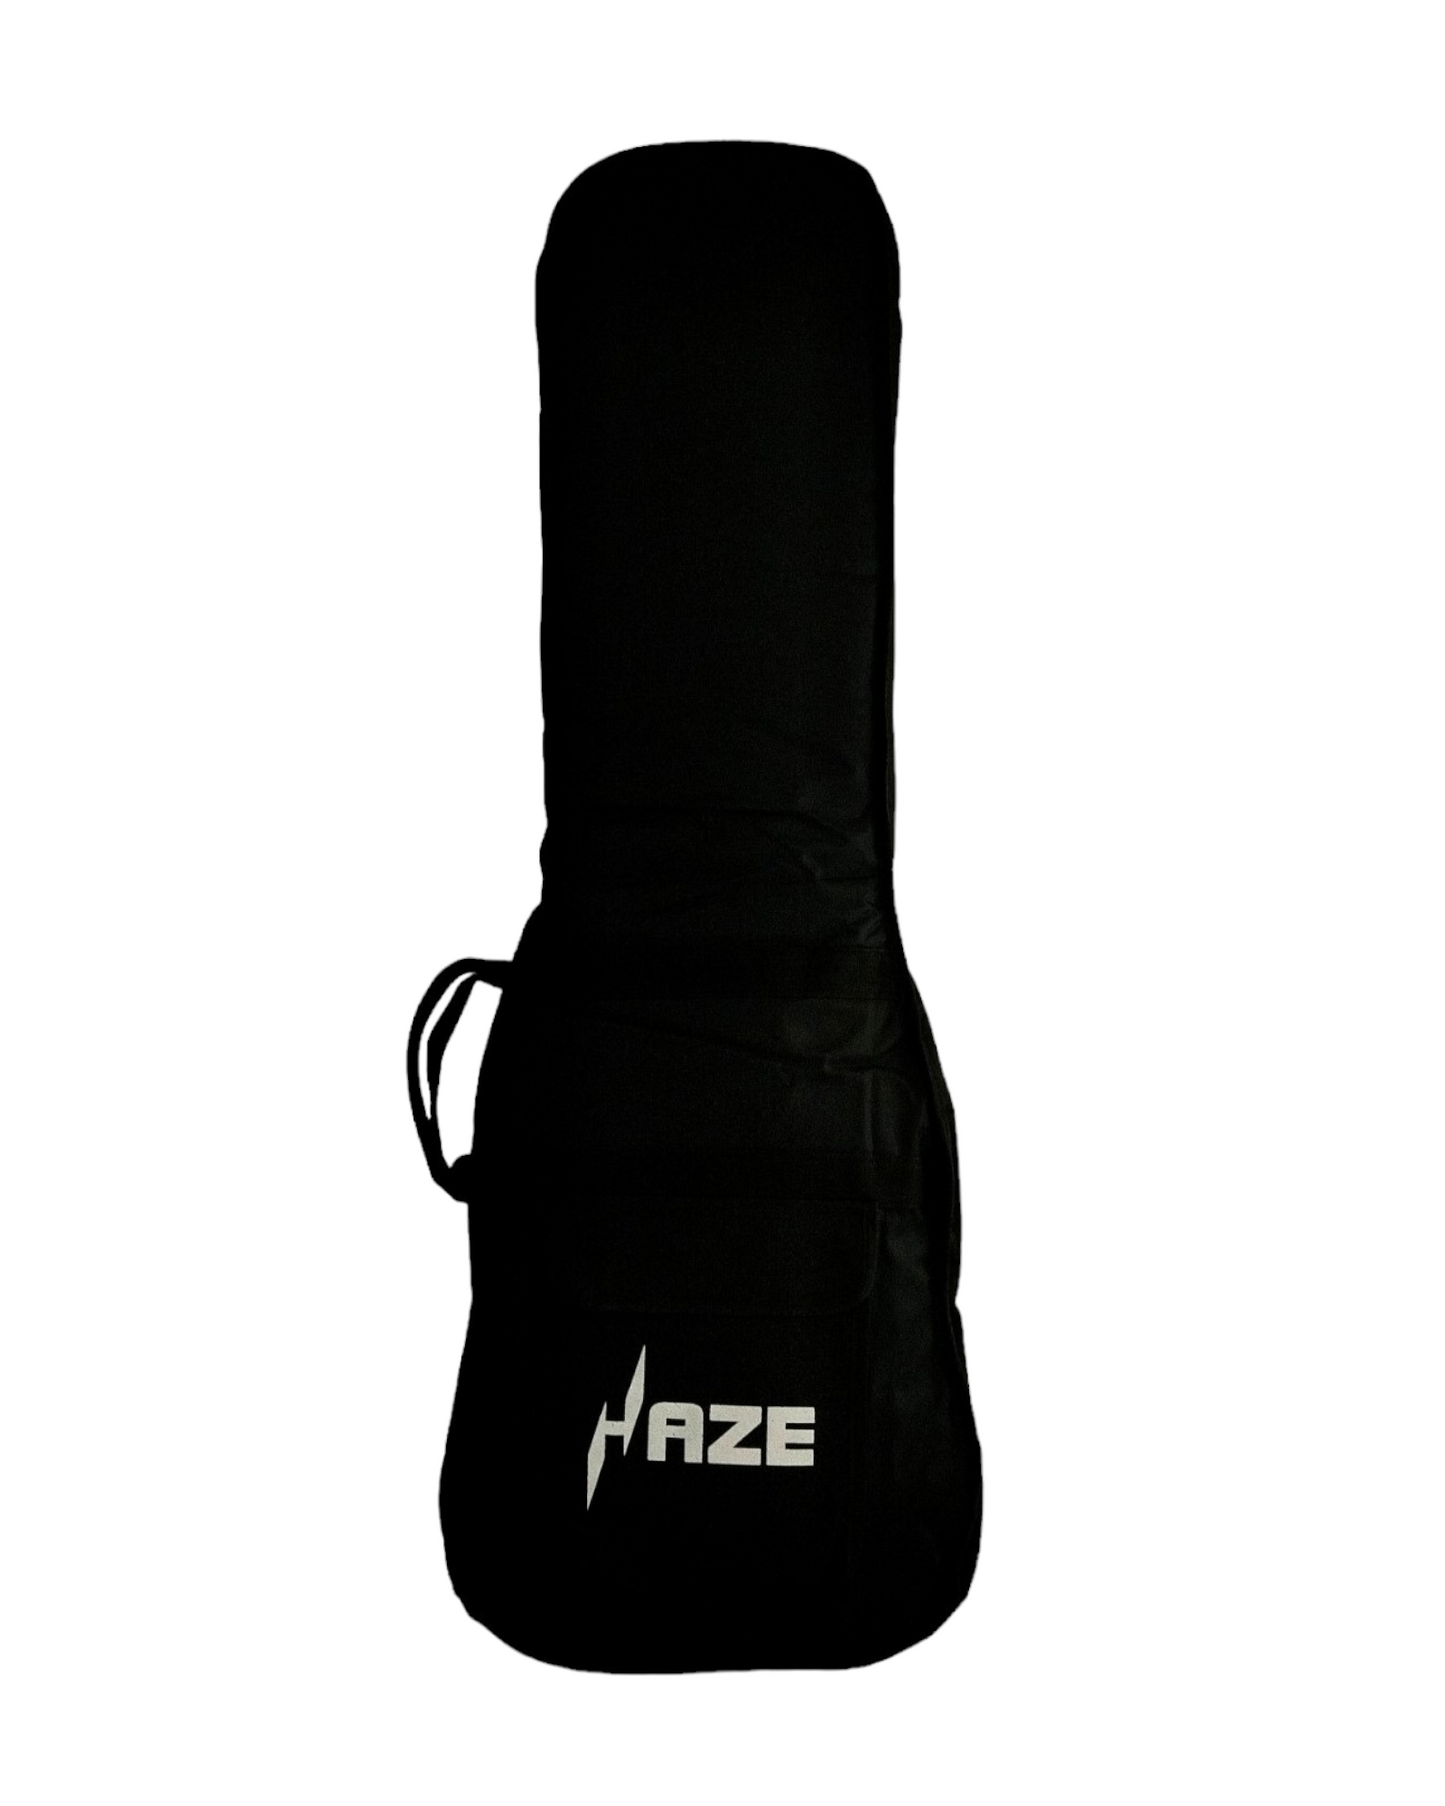 Haze Double Neck Electric Guitar Bag, 10mm Padded,Black, Full Size. HPBE010DB